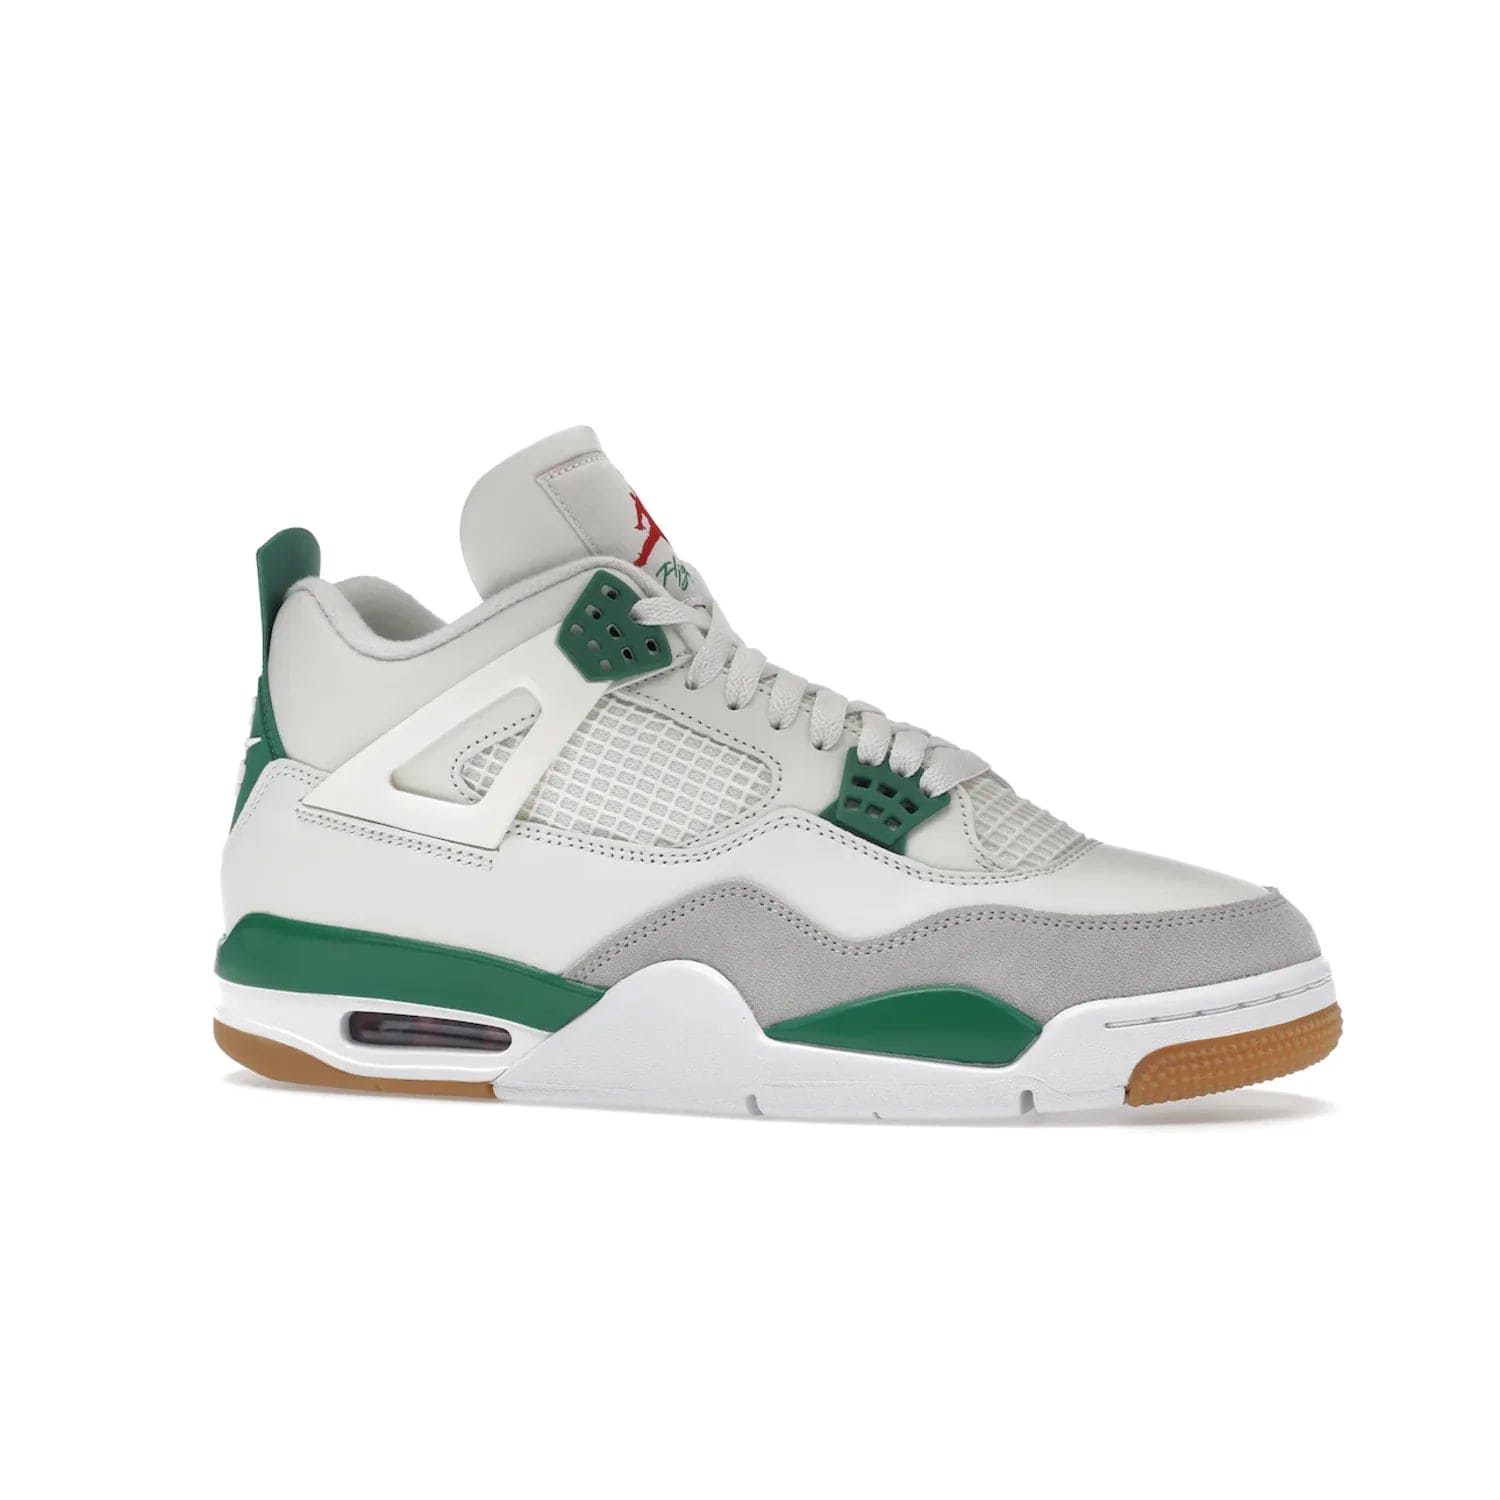 Jordan 4 Retro SB Pine Green - Image 3 - Only at www.BallersClubKickz.com - A white leather upper combined with a Neutral Grey suede mudguard gives this limited Air Jordan 4 Retro SB Pine Green sneaker its unmistakable style. Released March 20, 2023, the Jordan 4 Retro SB features a white and Pine Green midsole plus a red air unit with a gum outsole for grip. The perfect blend of Nike SB skateboarding and Jordan 4 classic design.